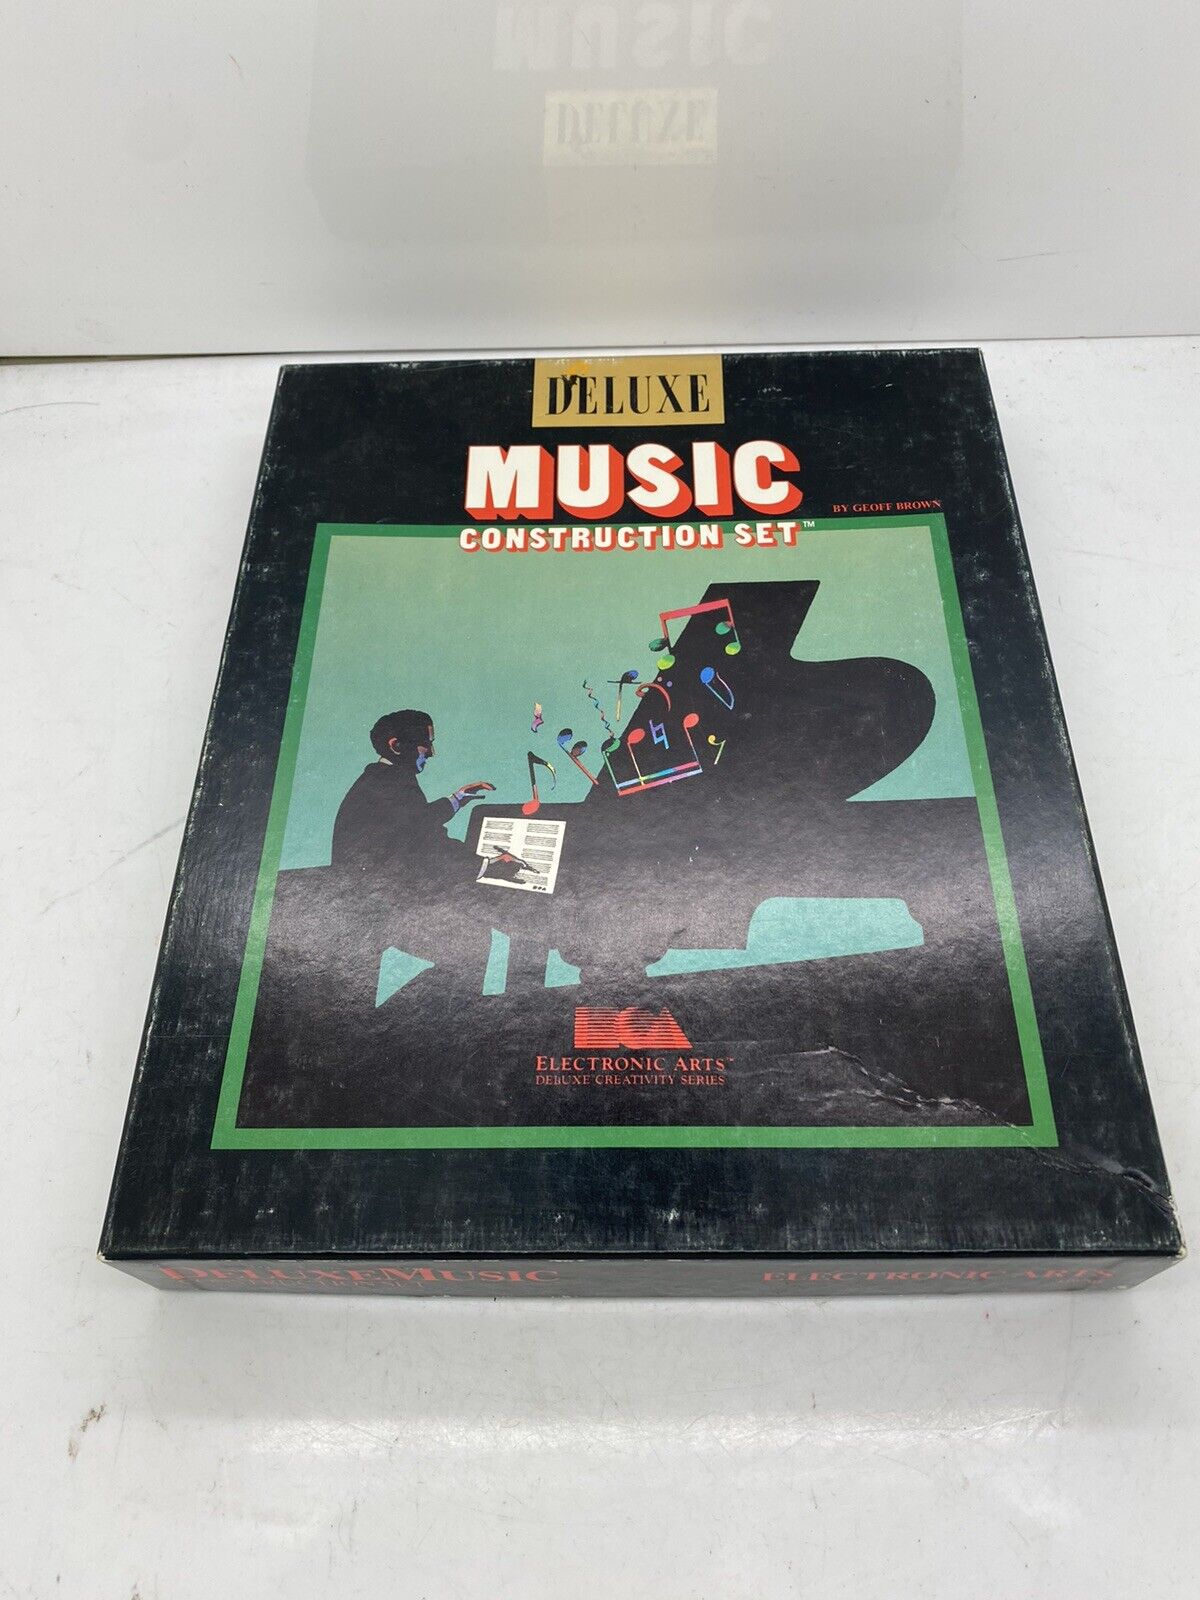 Deluxe Music Construction Set by Geoff Brown (Amiga) 119701 *PRE-OWNED*